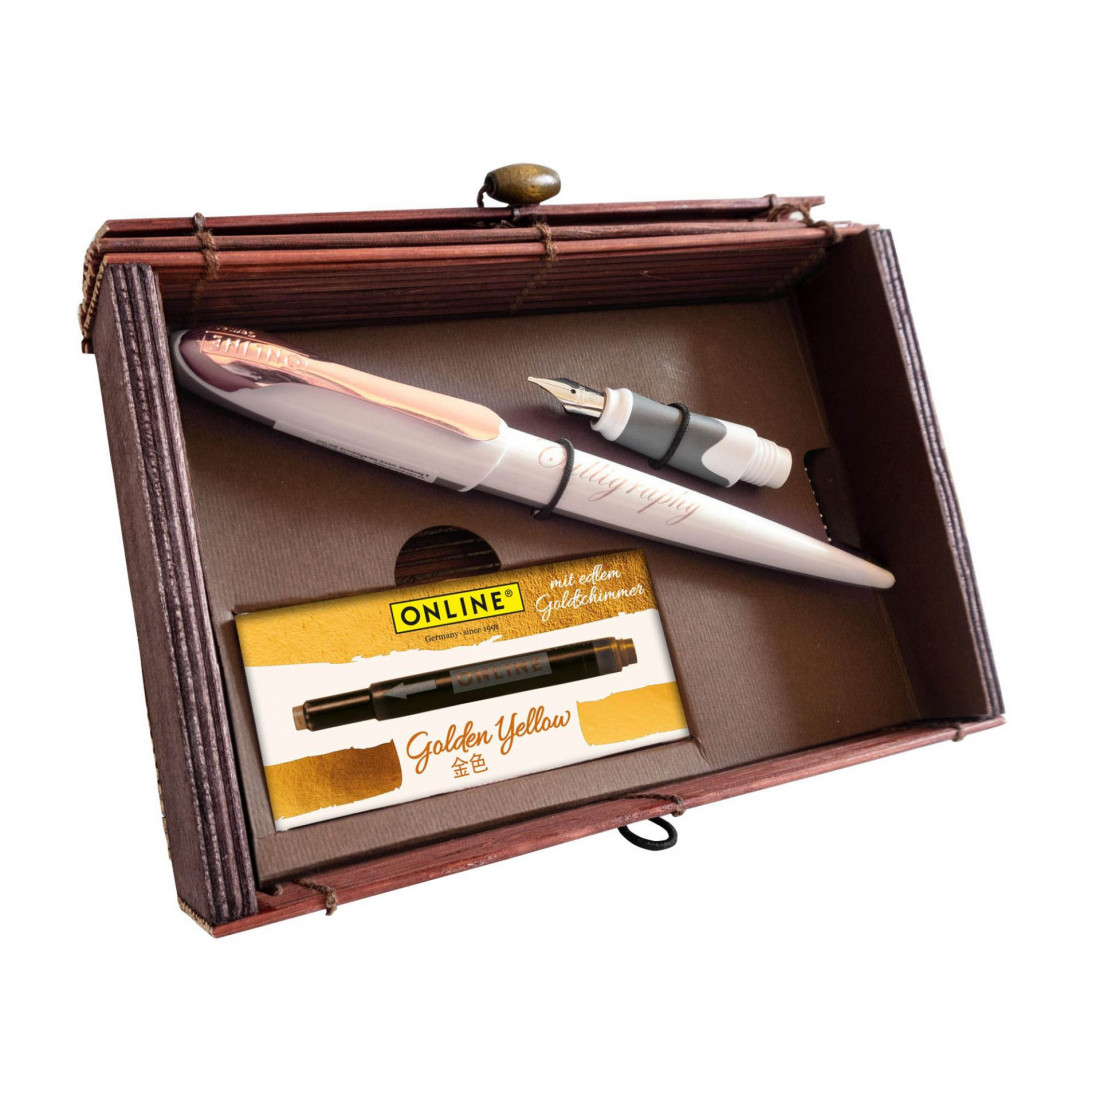 ONLINE Calligraphy Set in Bamboo Case Air Best Writer White Rose 10059